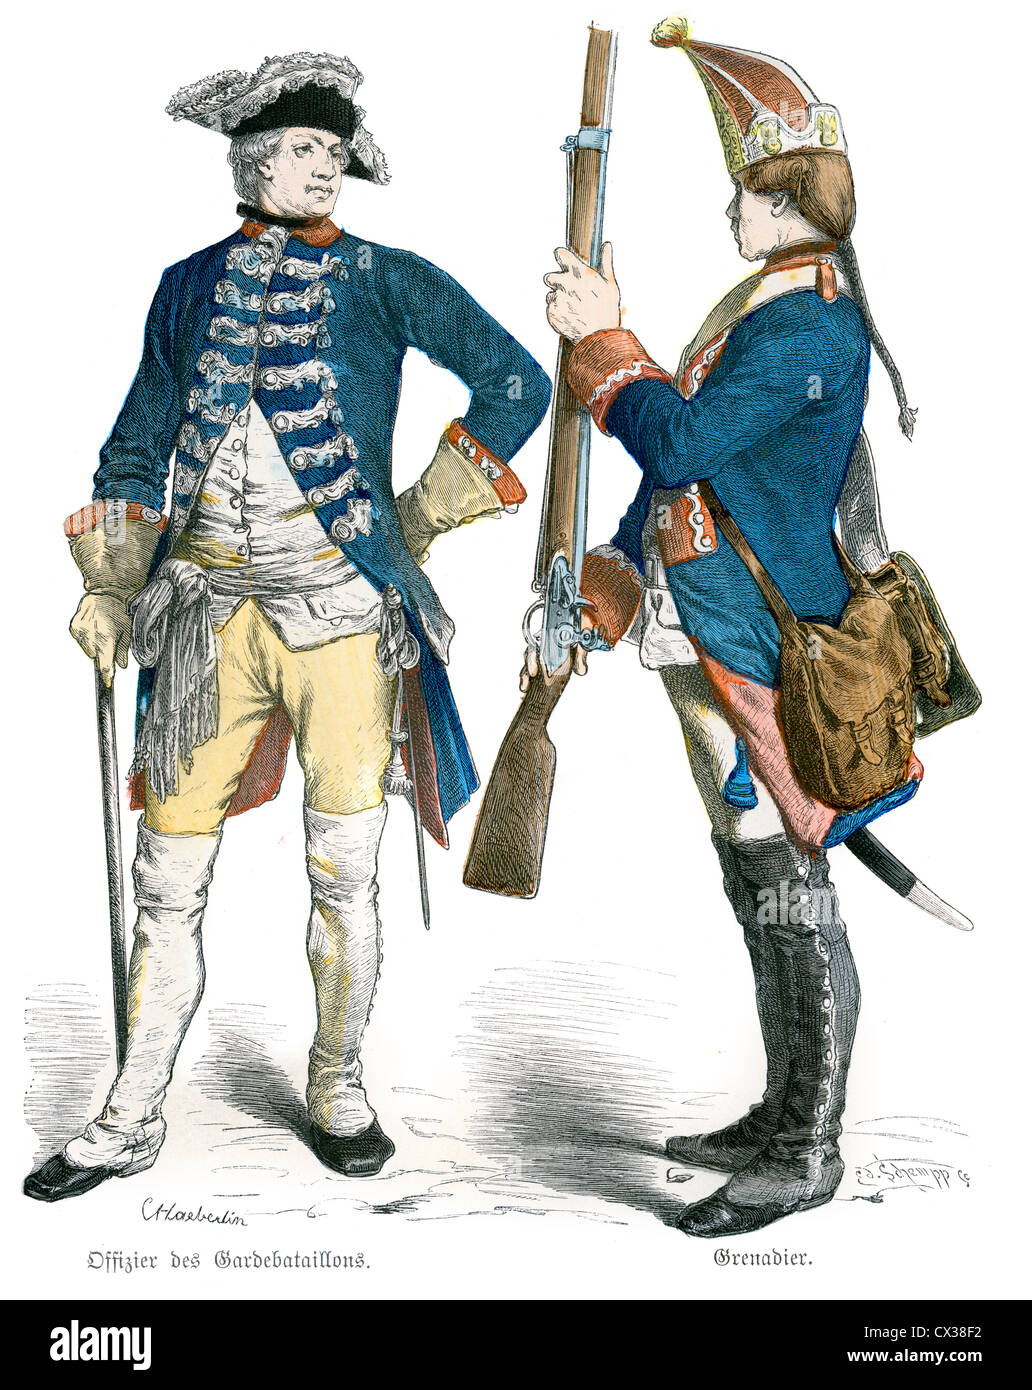 Prussian Officer and Grenadier Soldier from the 18th Century, circa 1770 Stock Photo